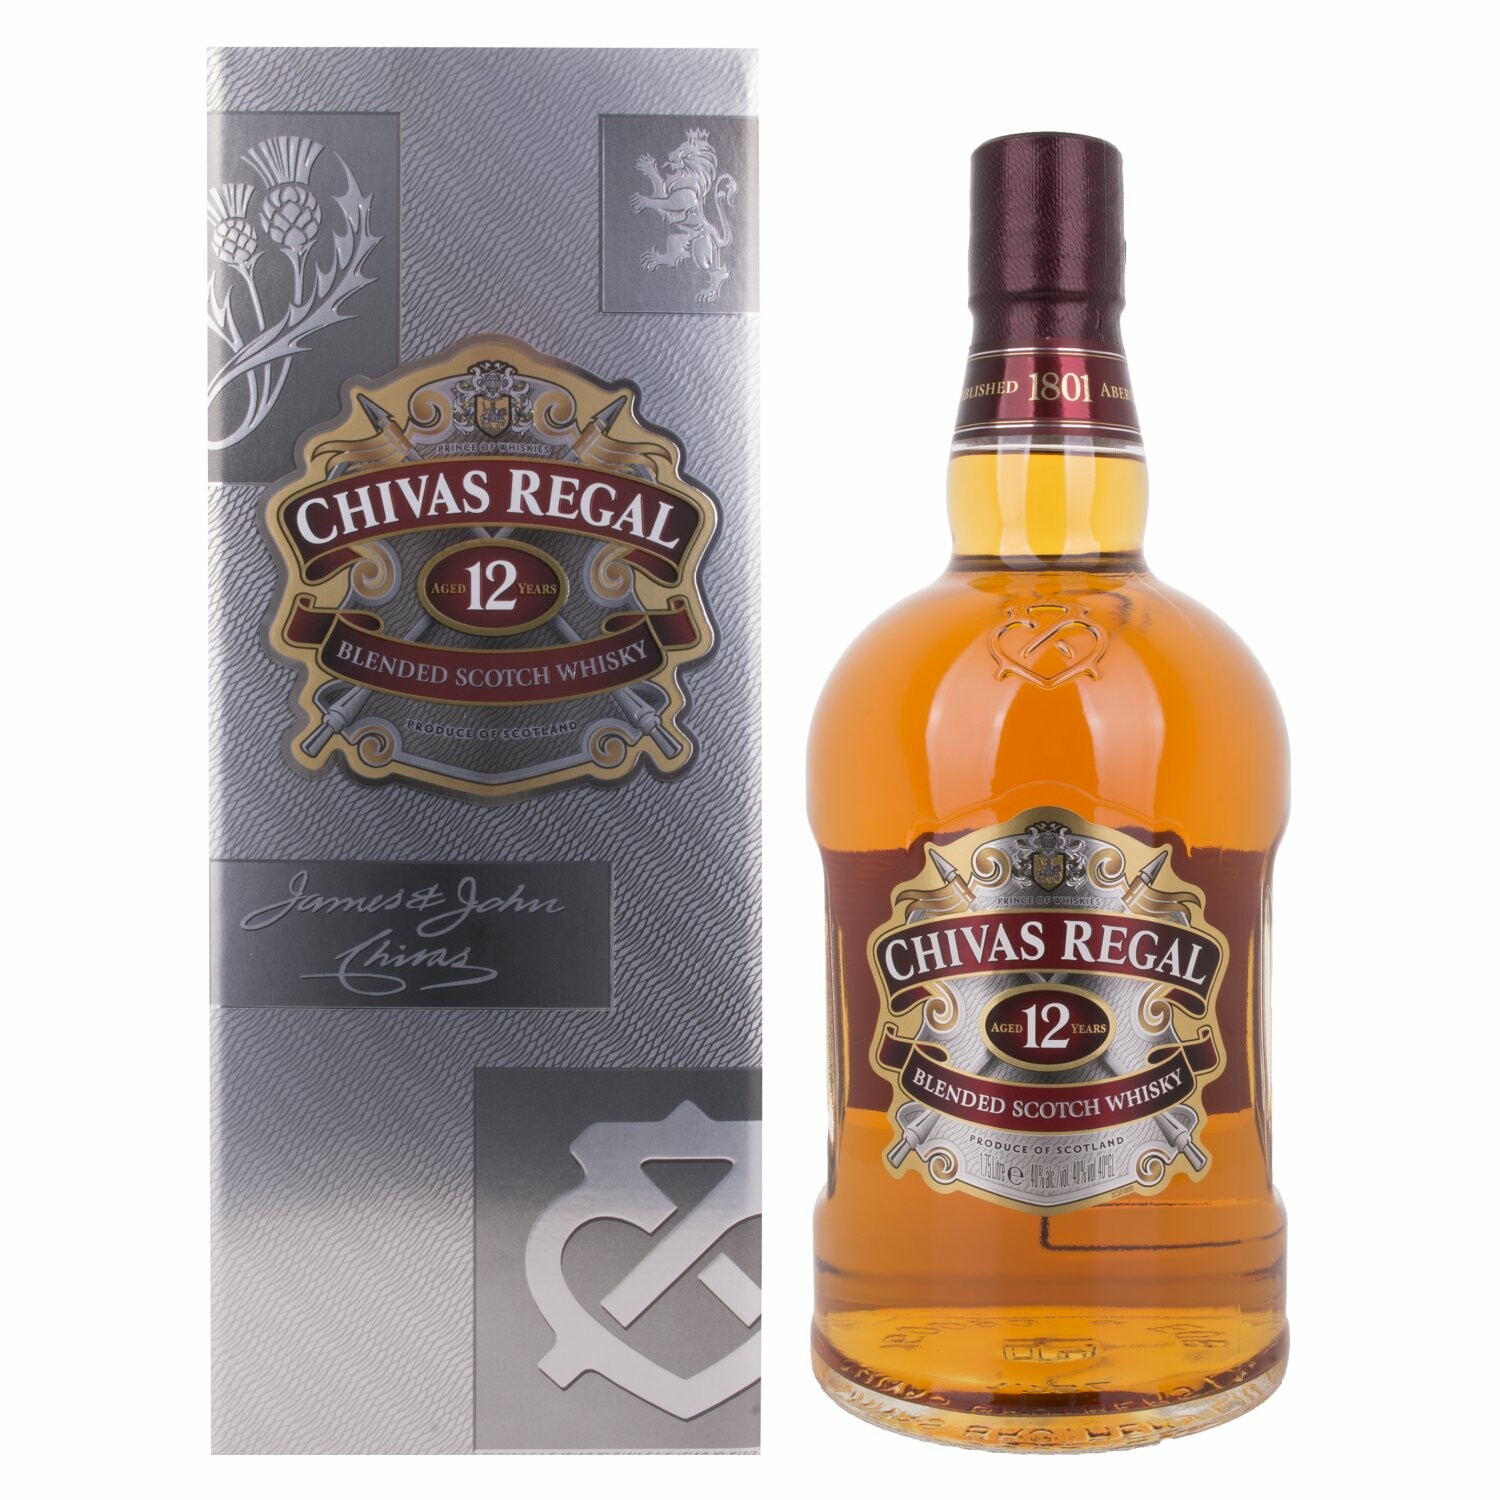 Chivas Regal 12 Years Old Blended Scotch Whisky 40% Vol. 1,75l in Giftbox